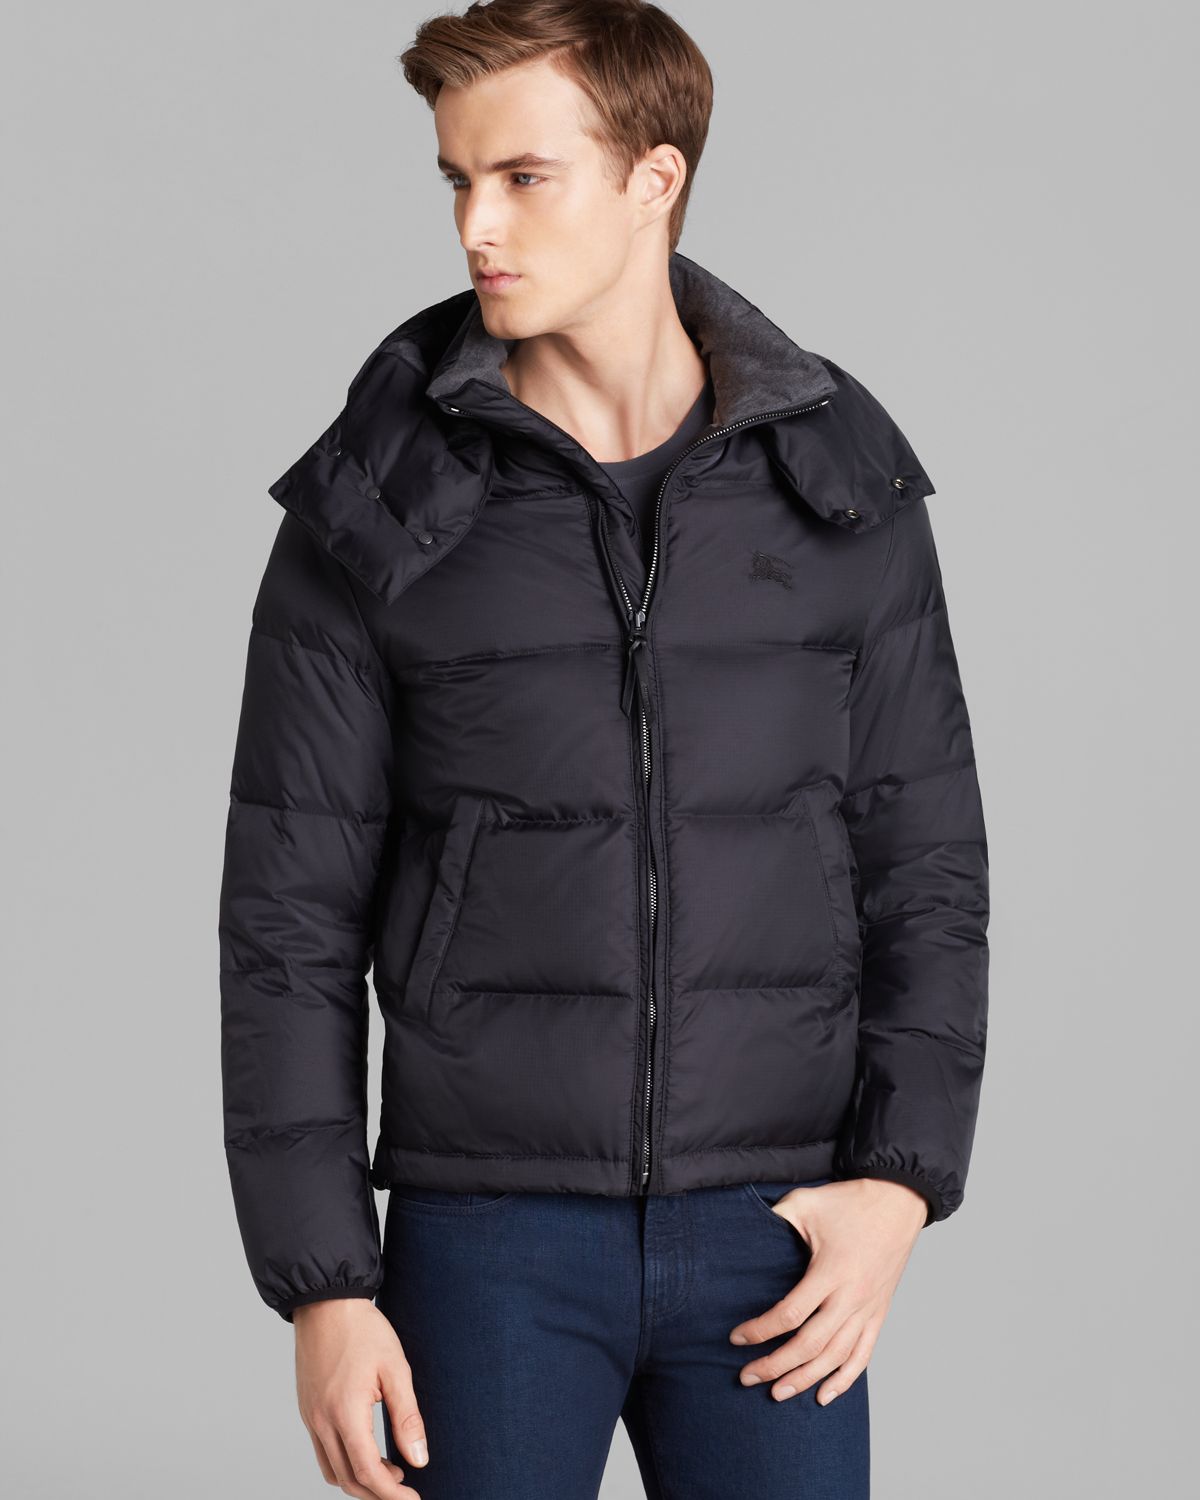 Lyst - Burberry Brit Colwood Down Puffer Jacket in Black for Men